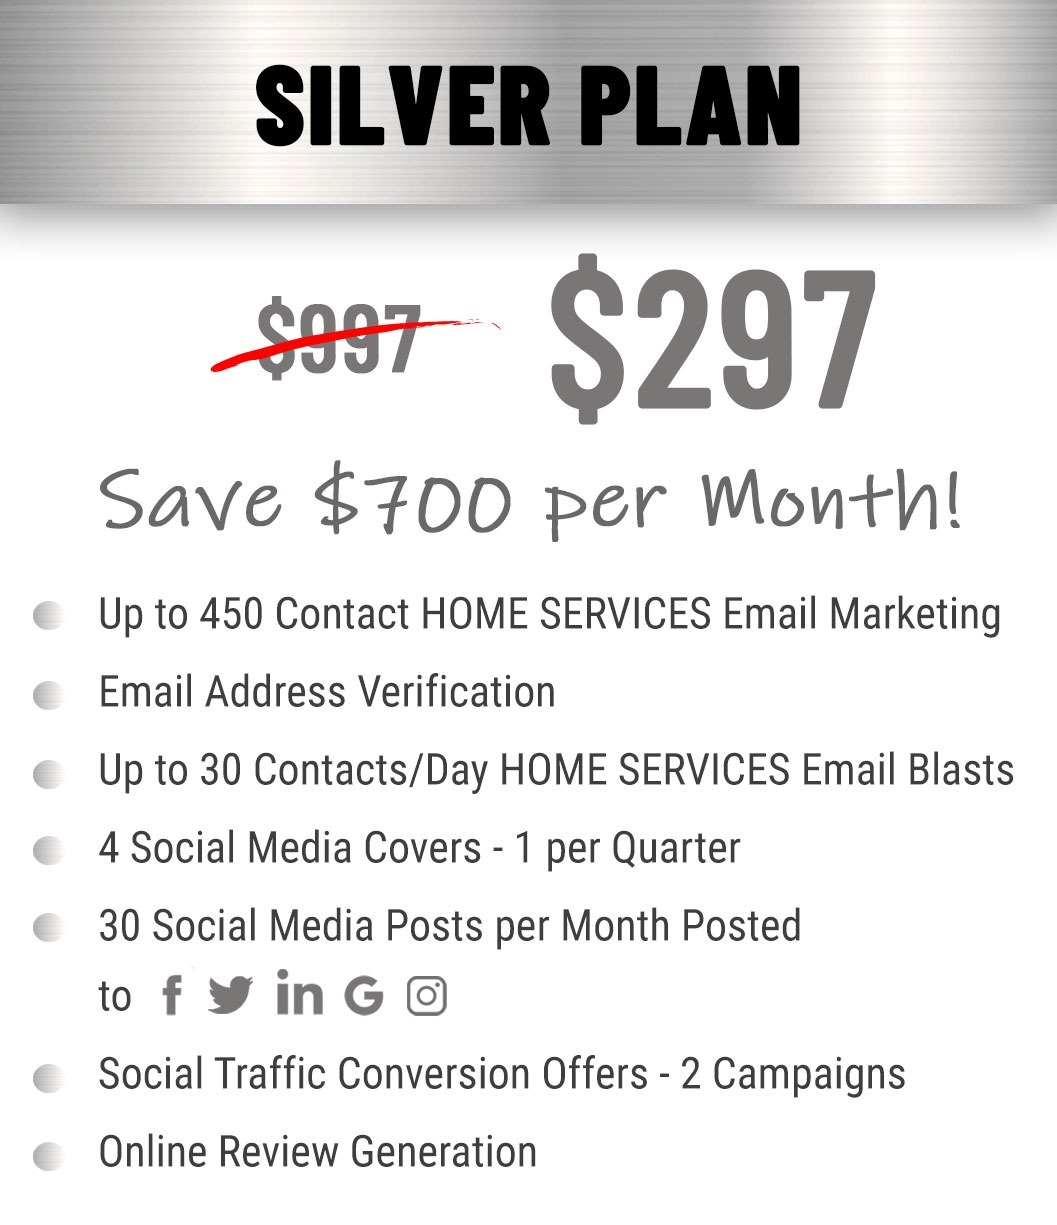 silver plan $297 per month pricing and features for home service contractors.